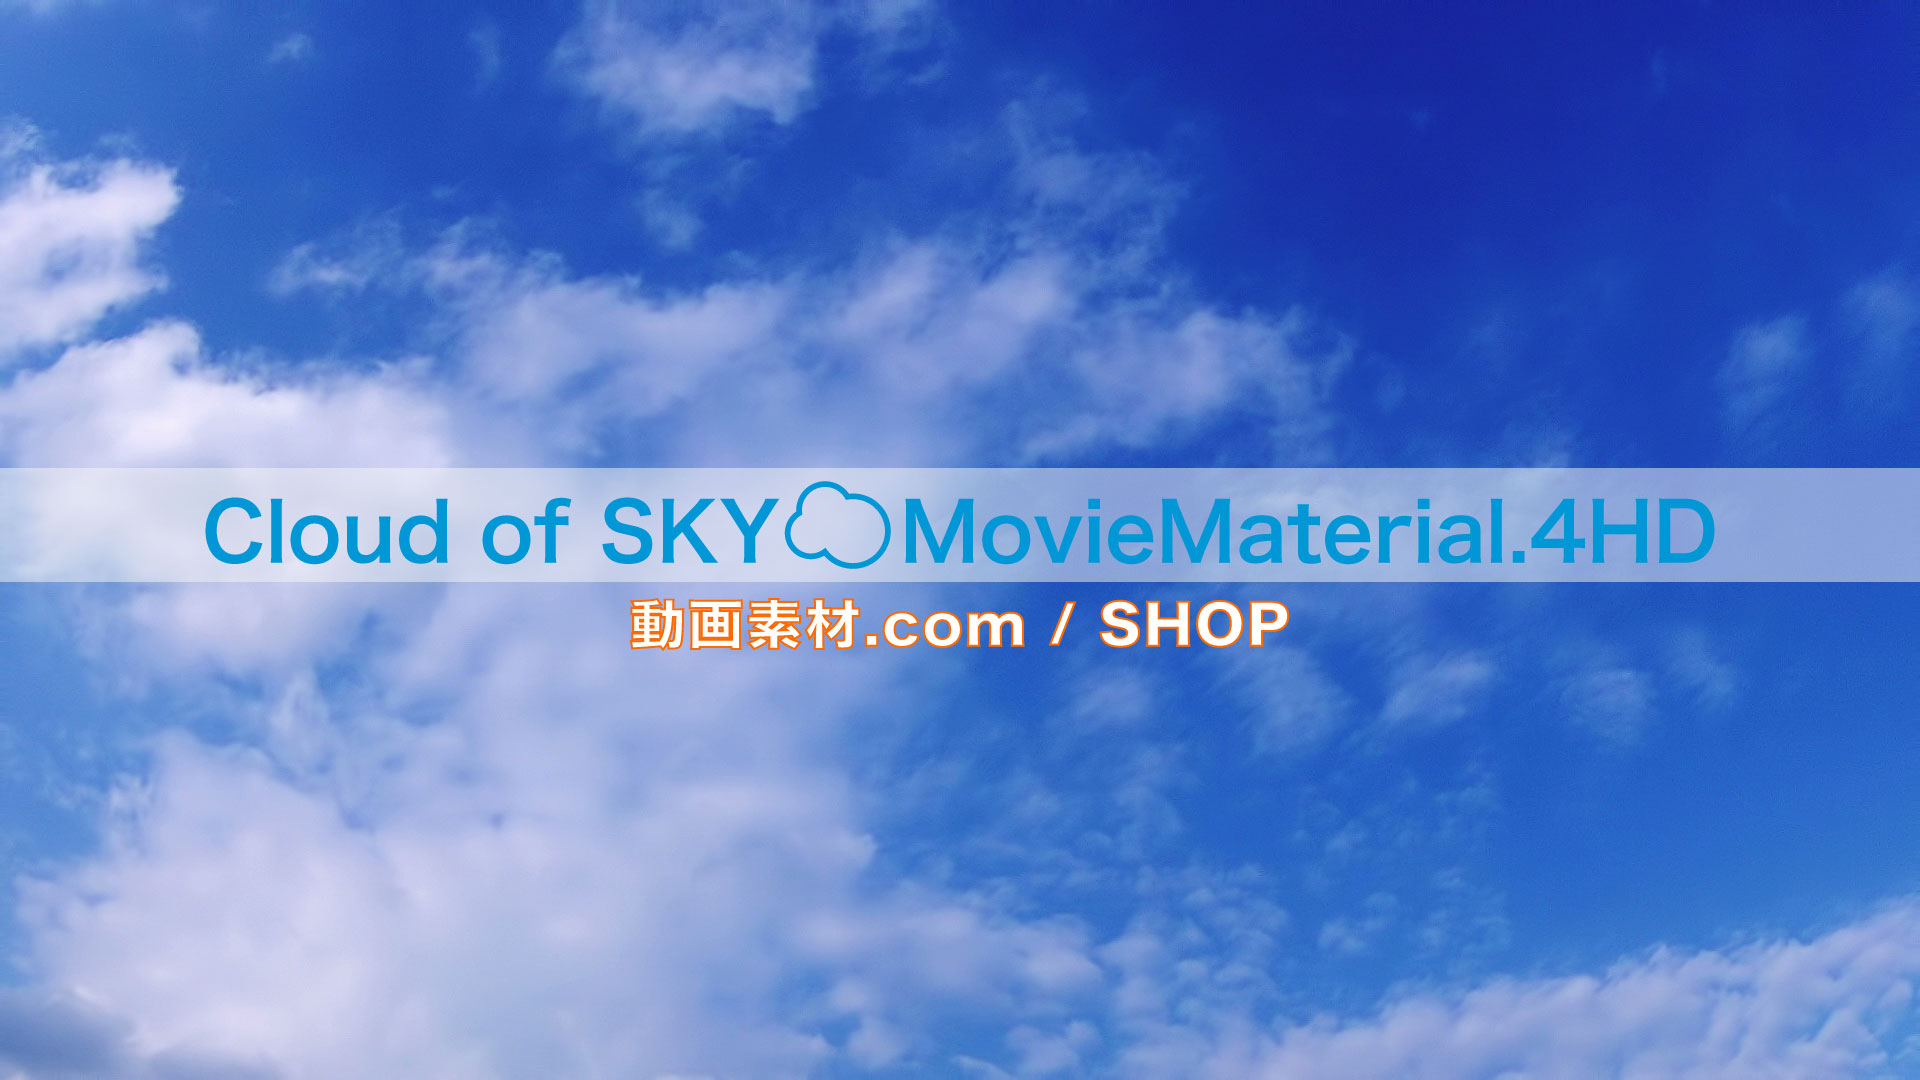 【Cloud of SKY MovieMaterial.HDSET】 ロイヤリティフリー フルハイビジョン動画素材集 Image.14